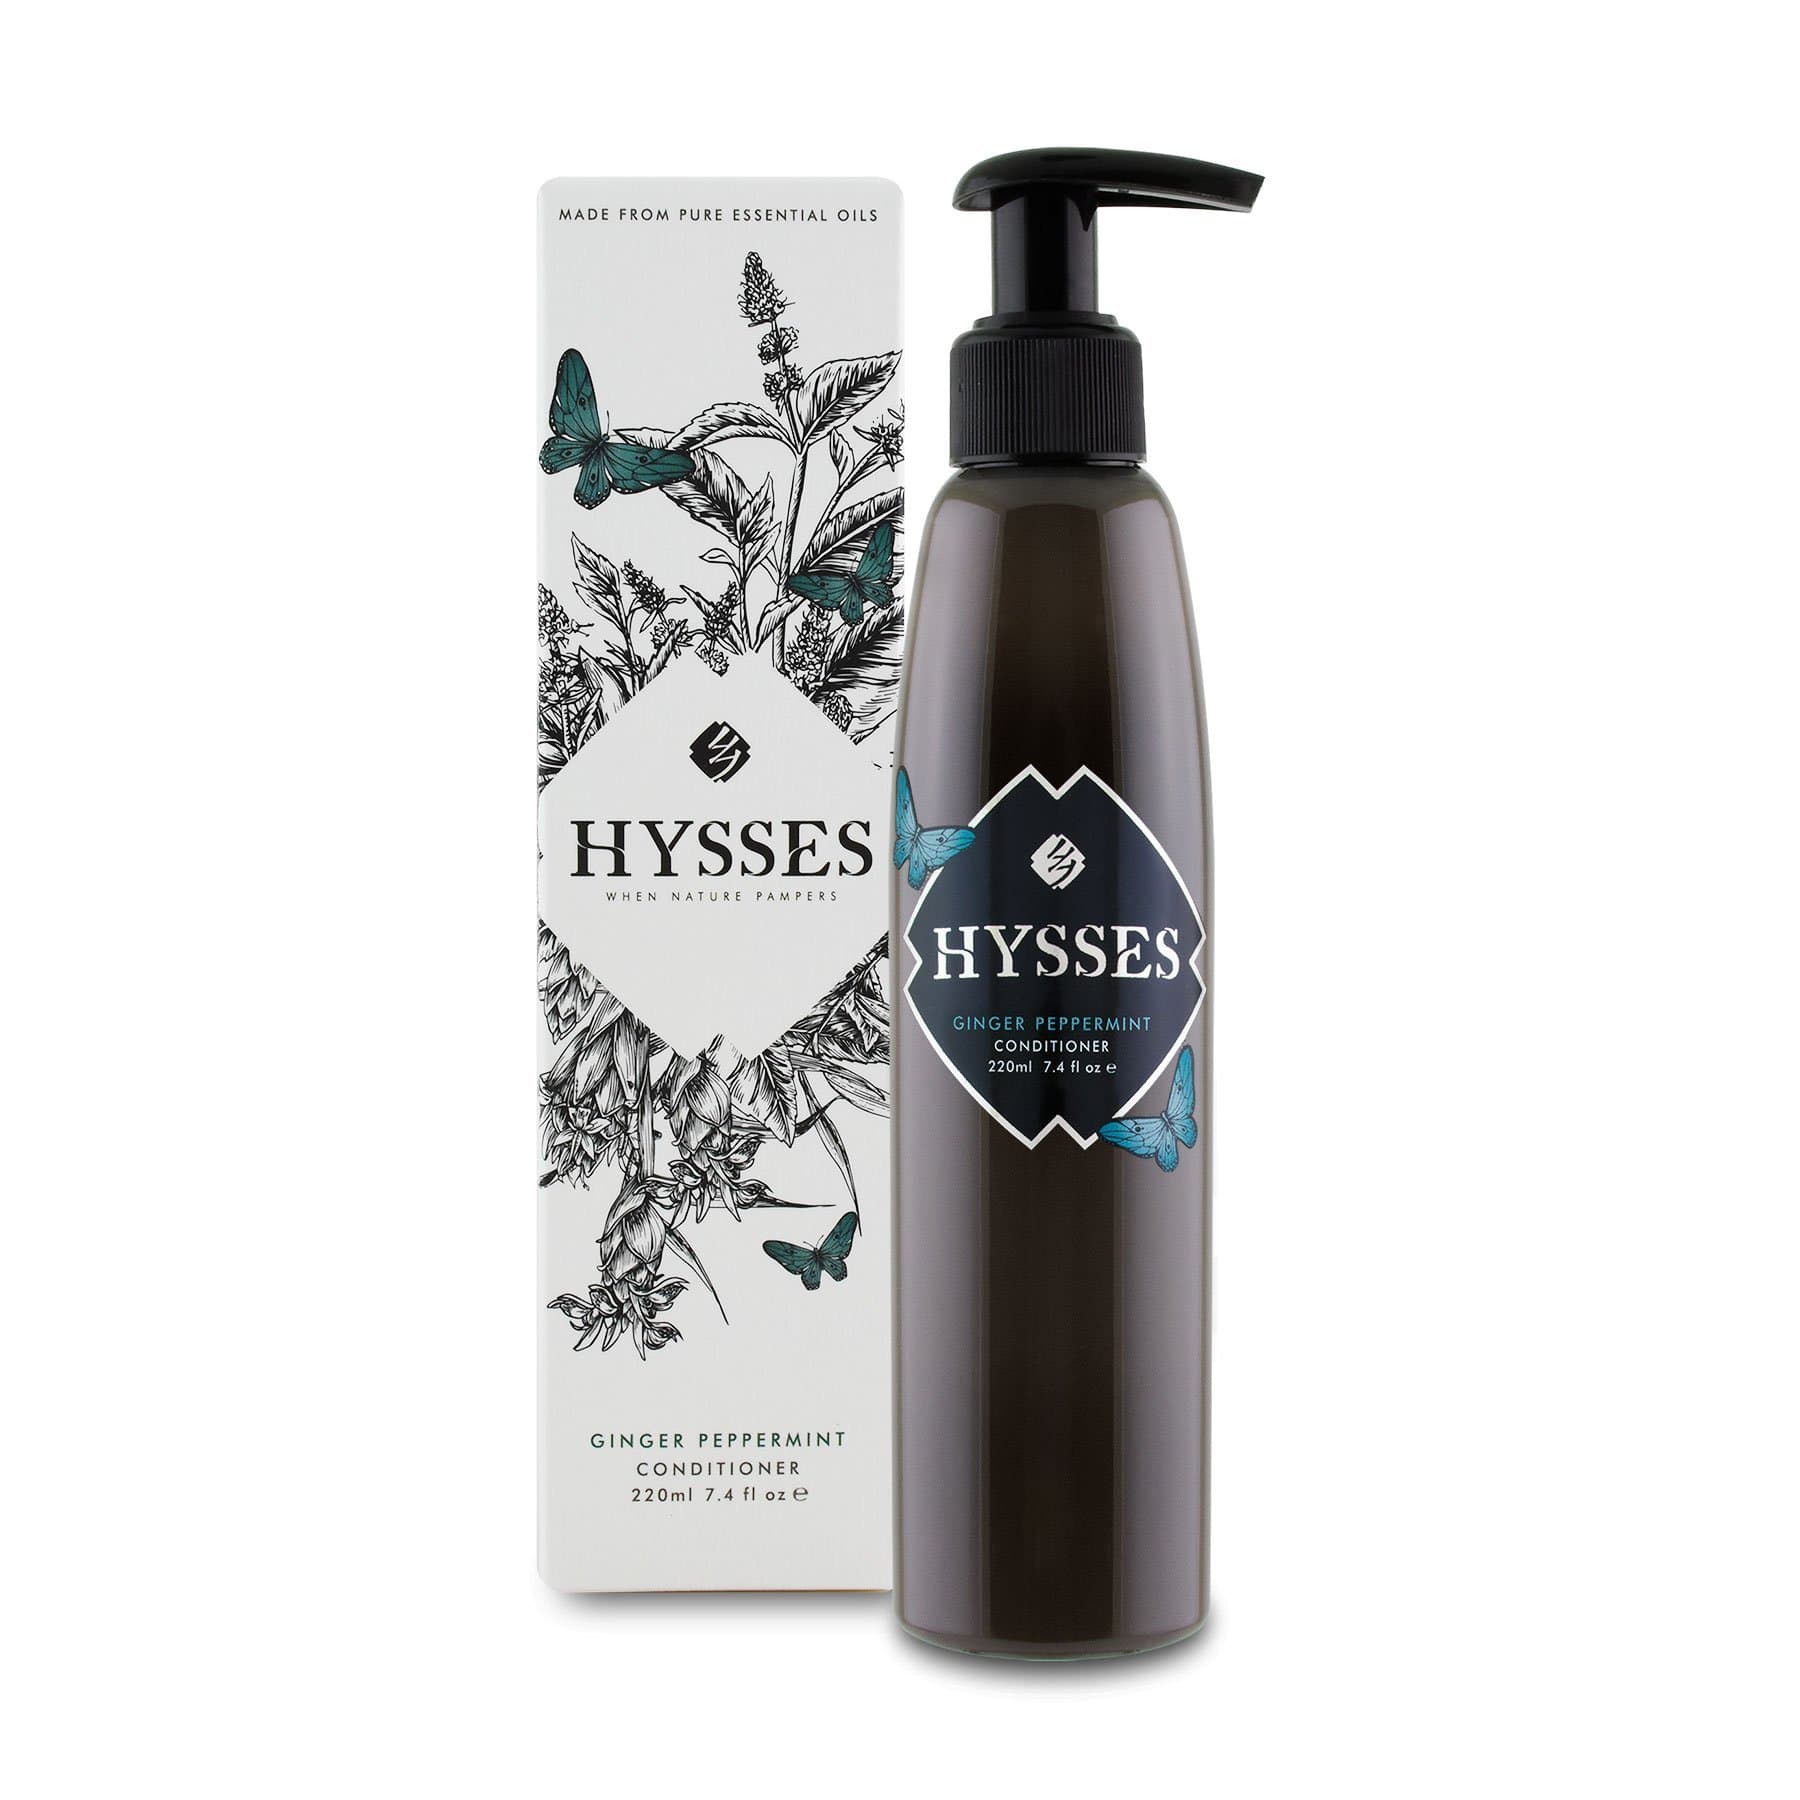 Hysses Hair Care 220ml HAIR CONDITIONER GINGER PEPPERMINT, 220ML (20%)